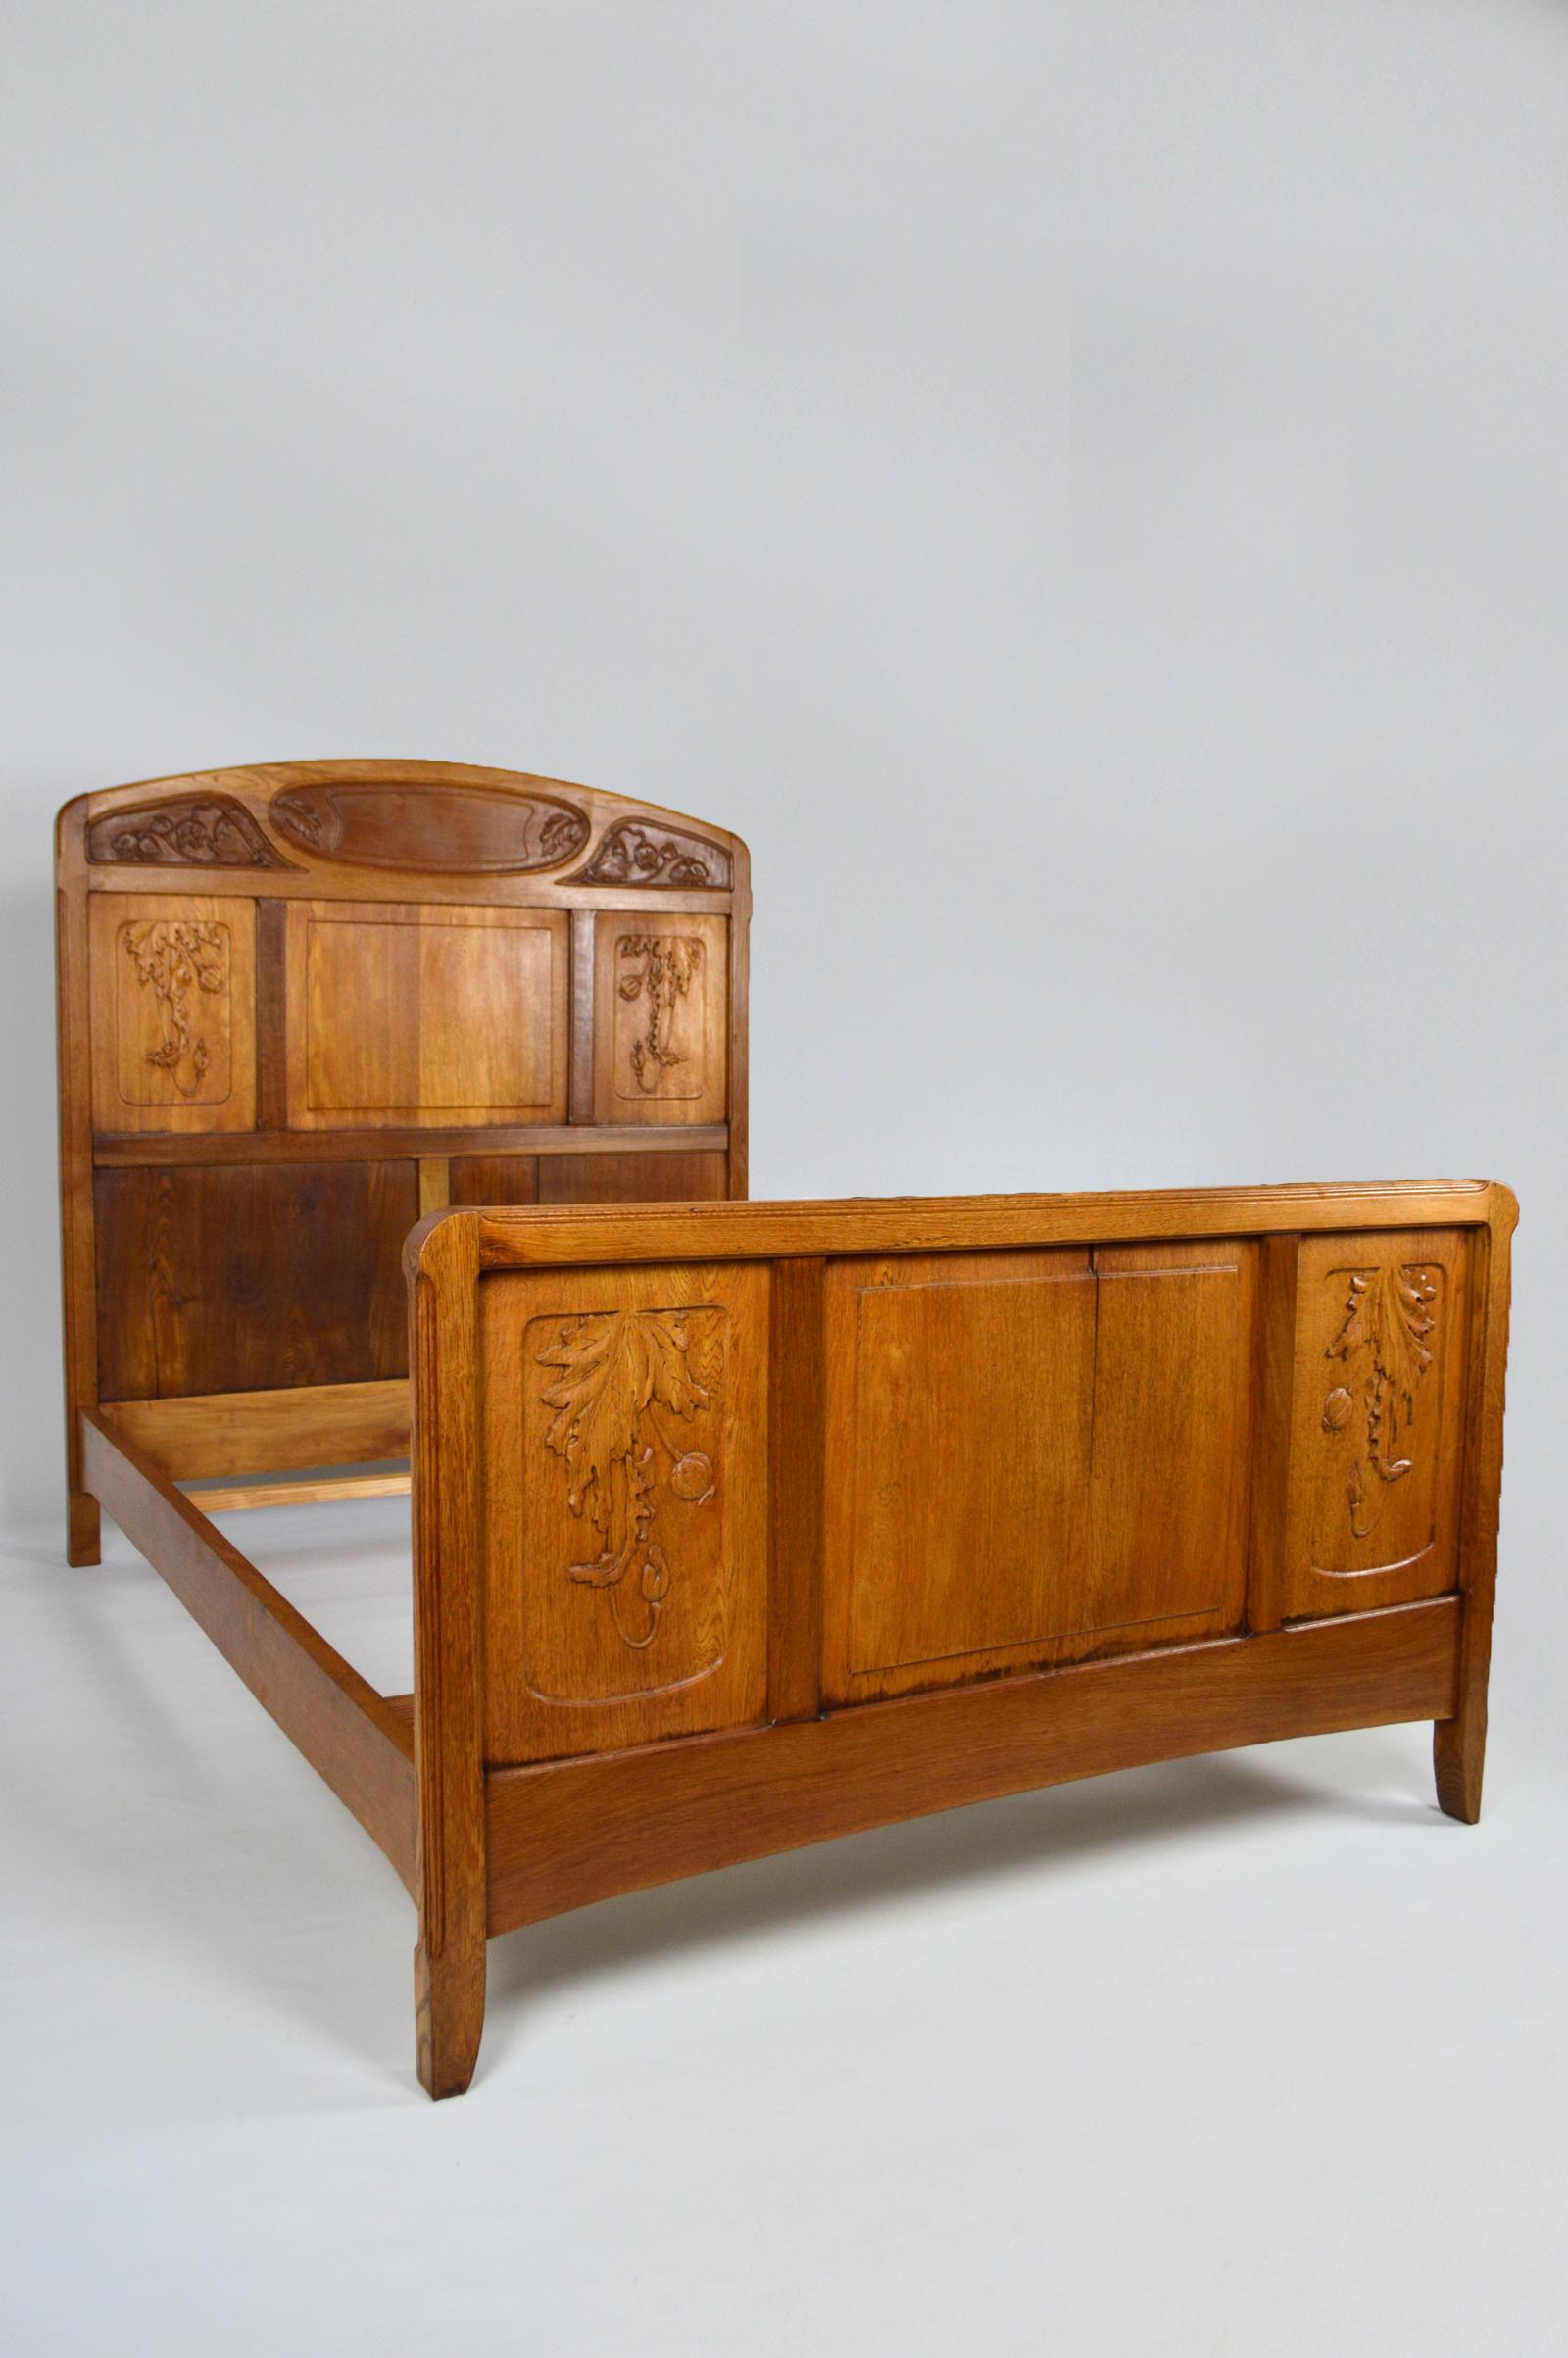 Bed in carved oak on a floral theme: Papaver somniferum / Opium Poppy.
To make sweet dreams ...
Art Nouveau, France, circa 1910.

Good condition.
The bed has been restored, the old finish has been stripped, the wood treated against xylophages,